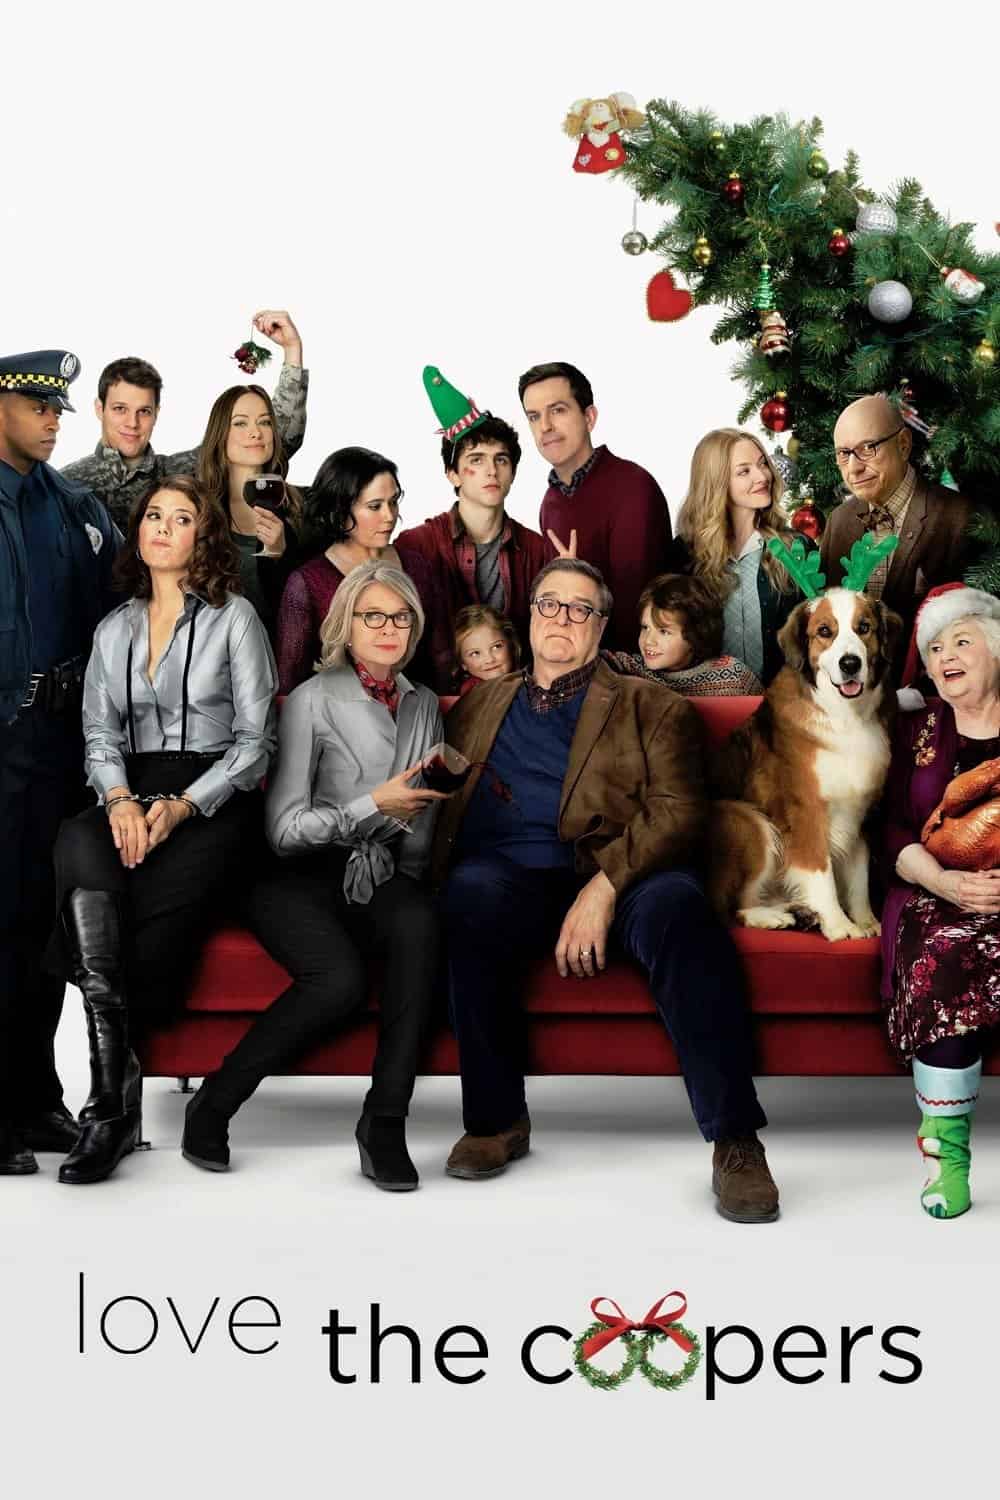 Love the Coopers, 2015 